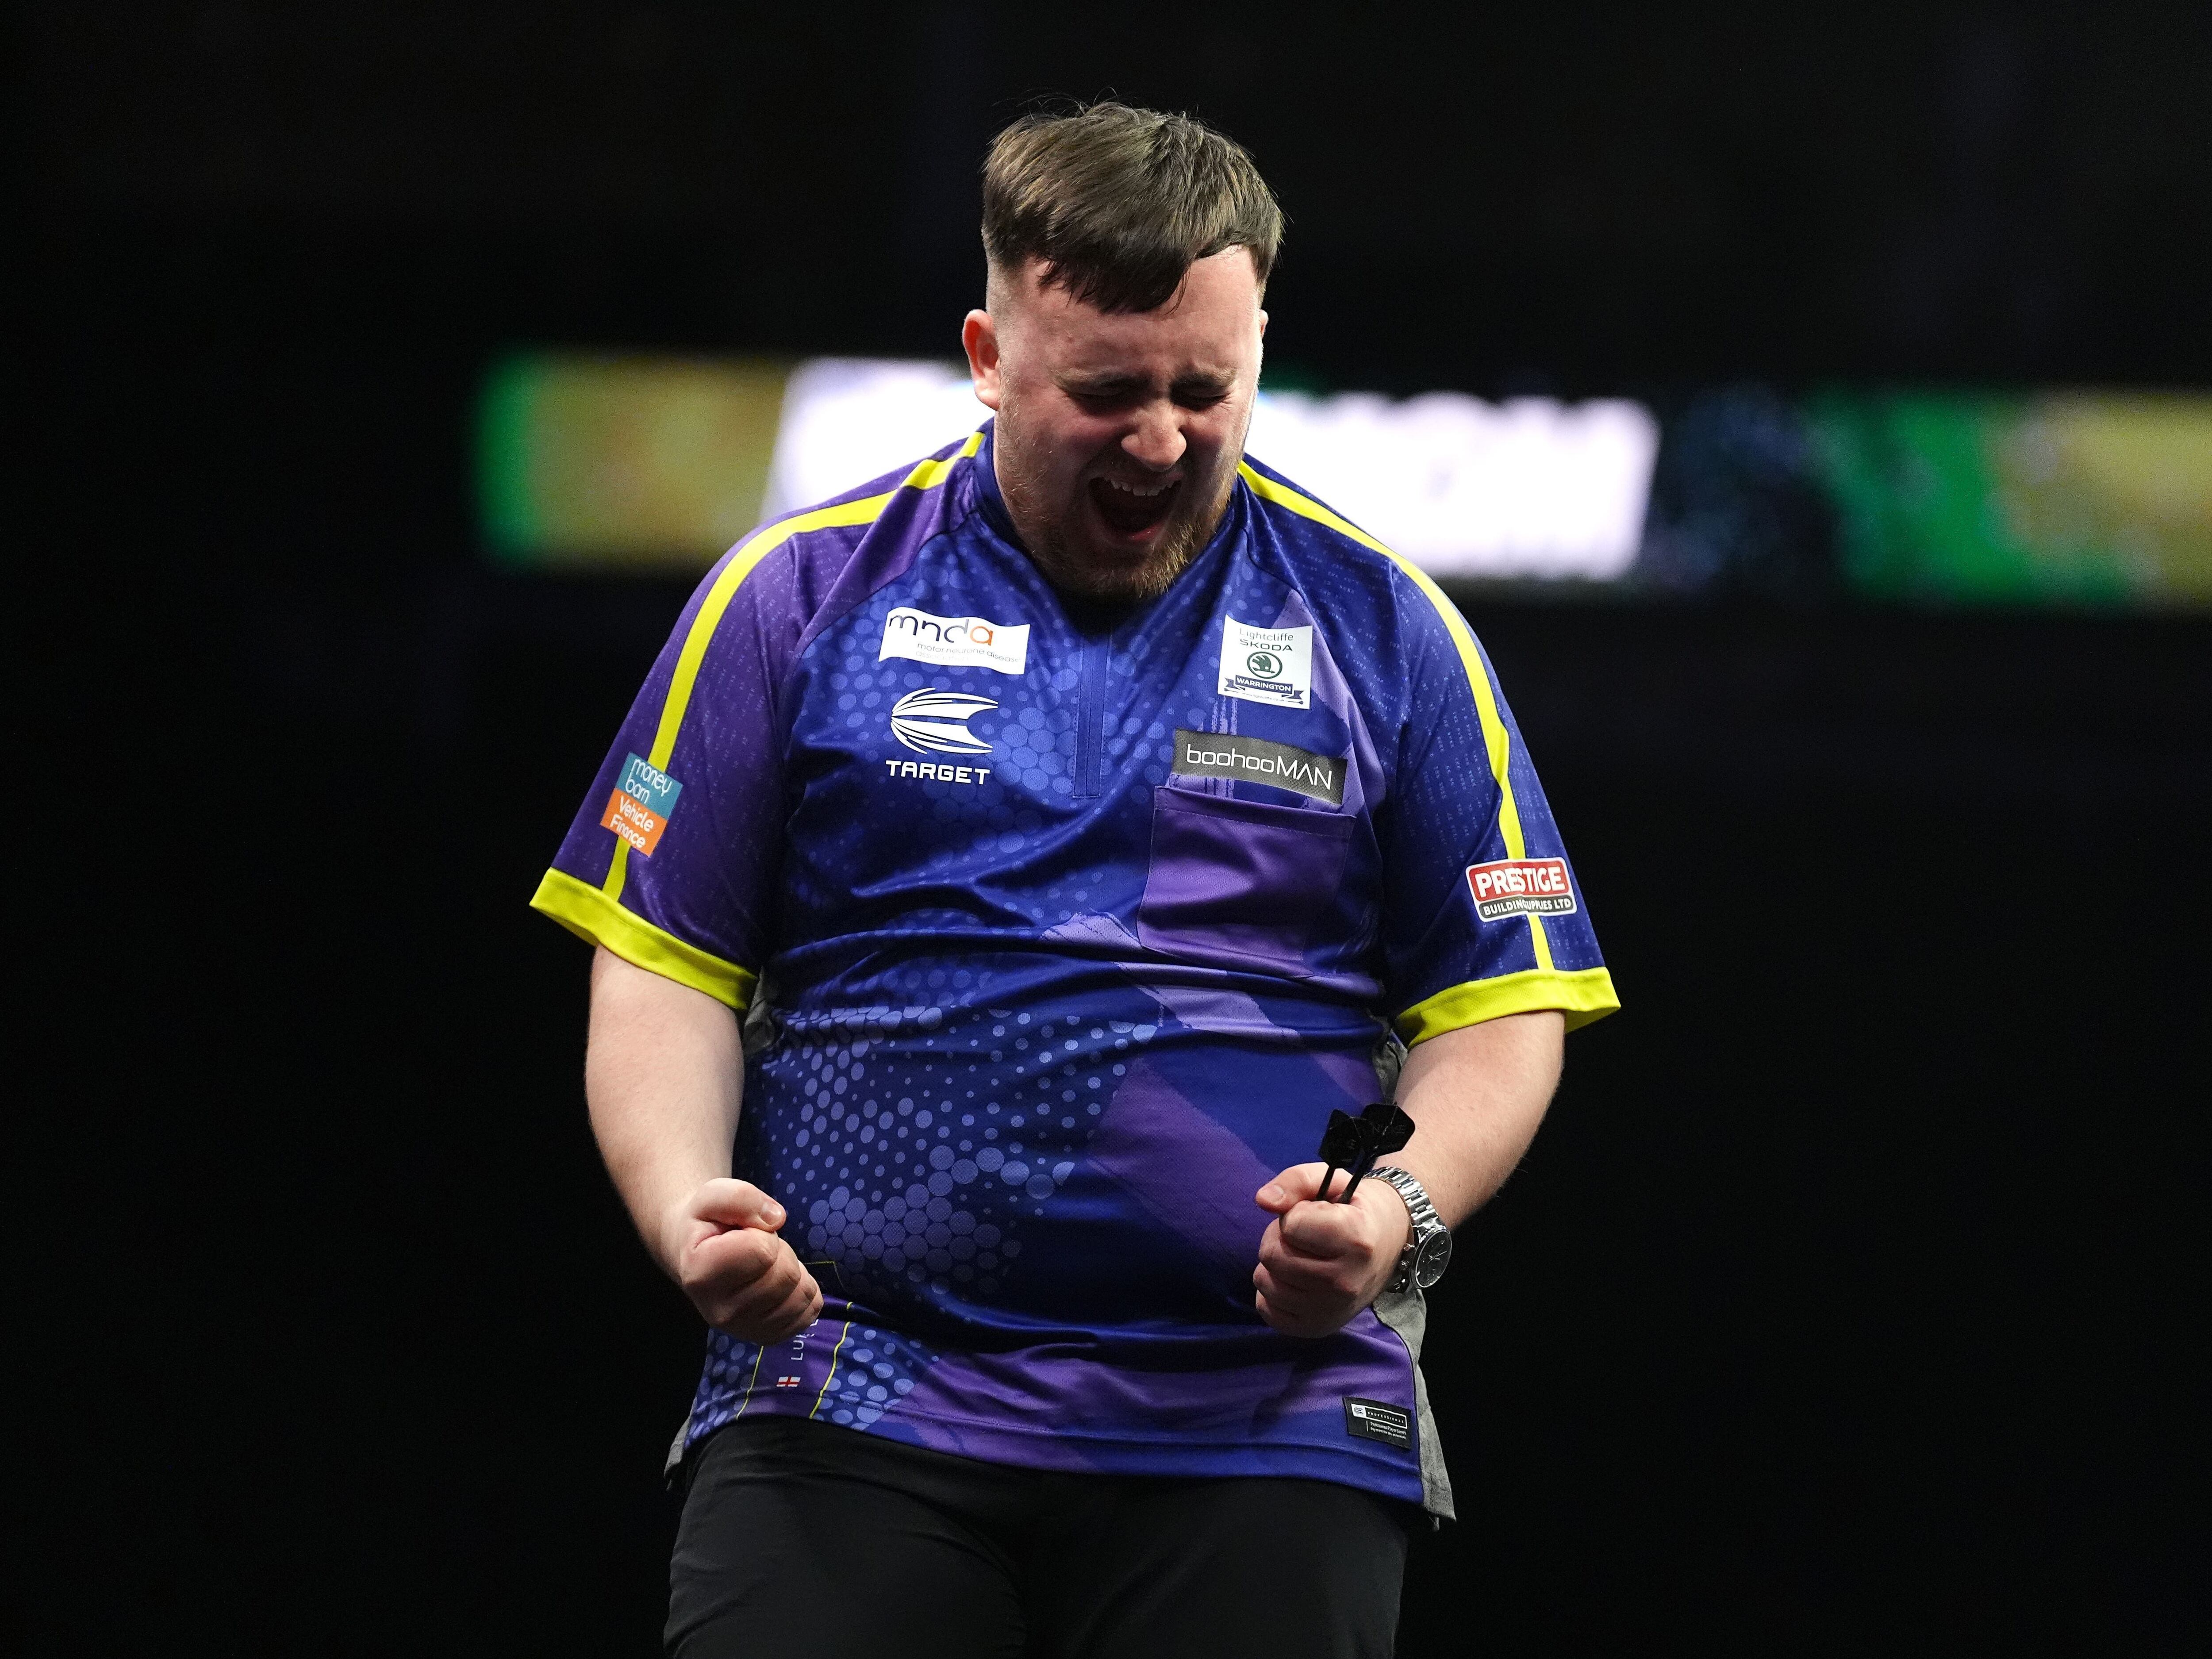 There was a bit of rust – Luke Littler comes good to win Poland Darts Open